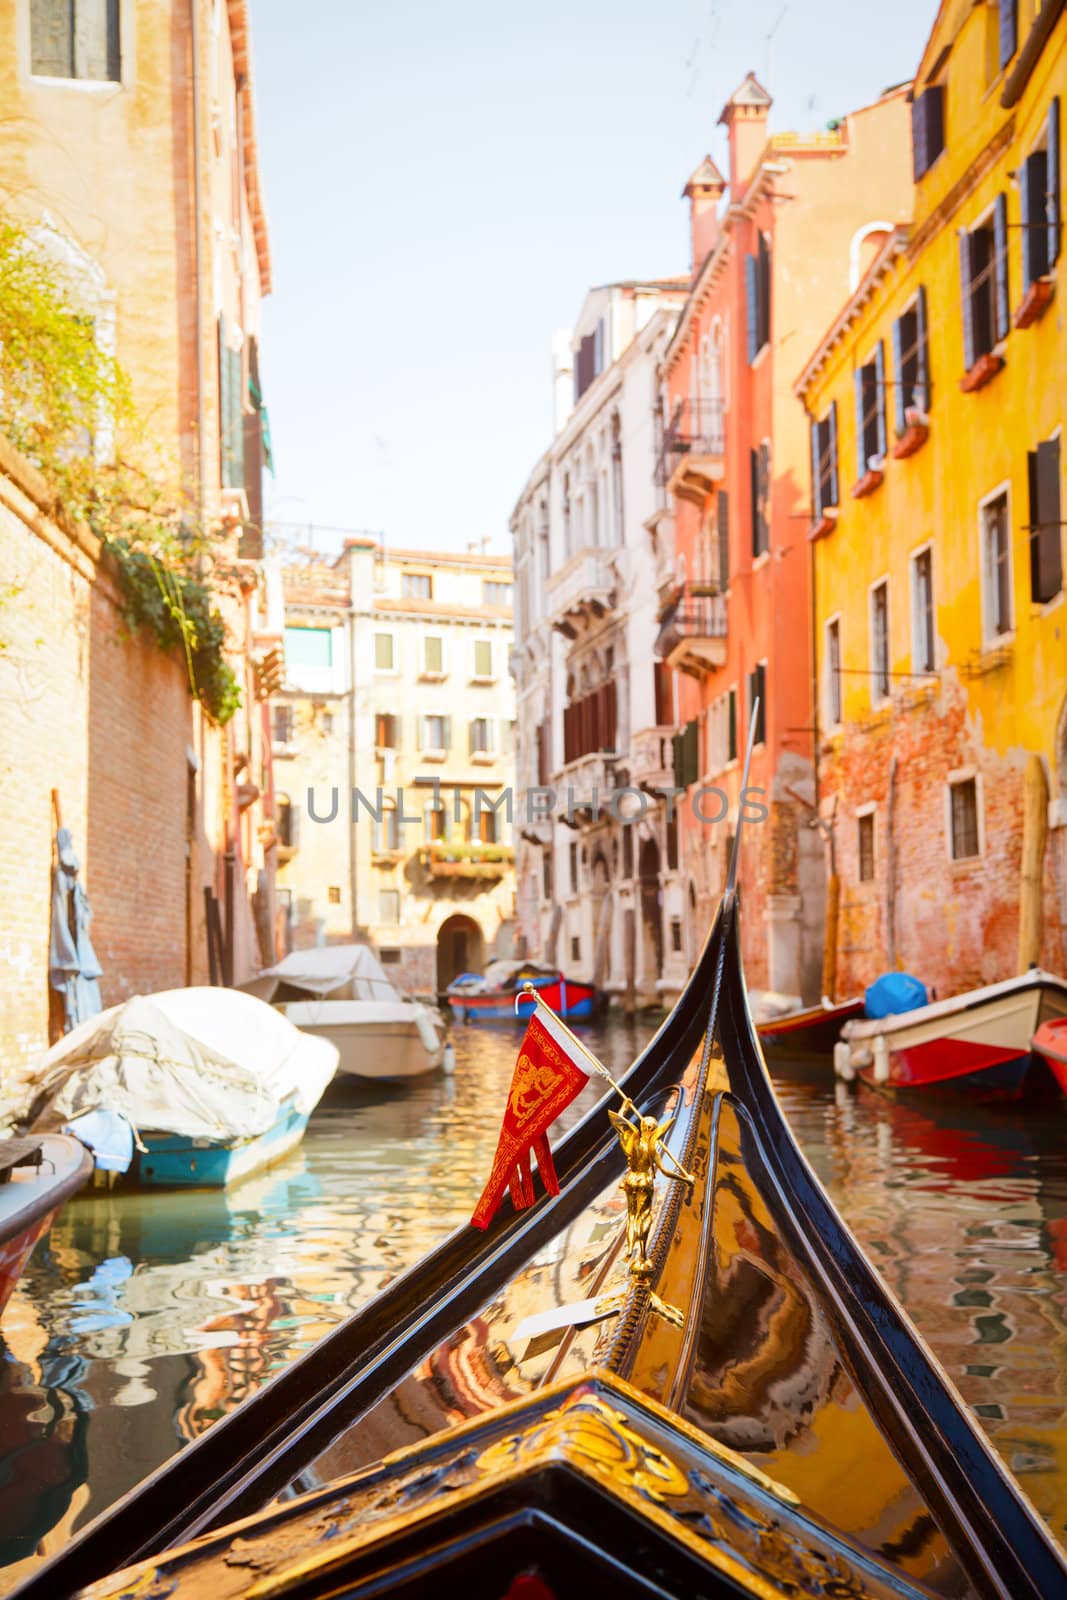 A view from gondola during the ride through the canals of Venice in Italy